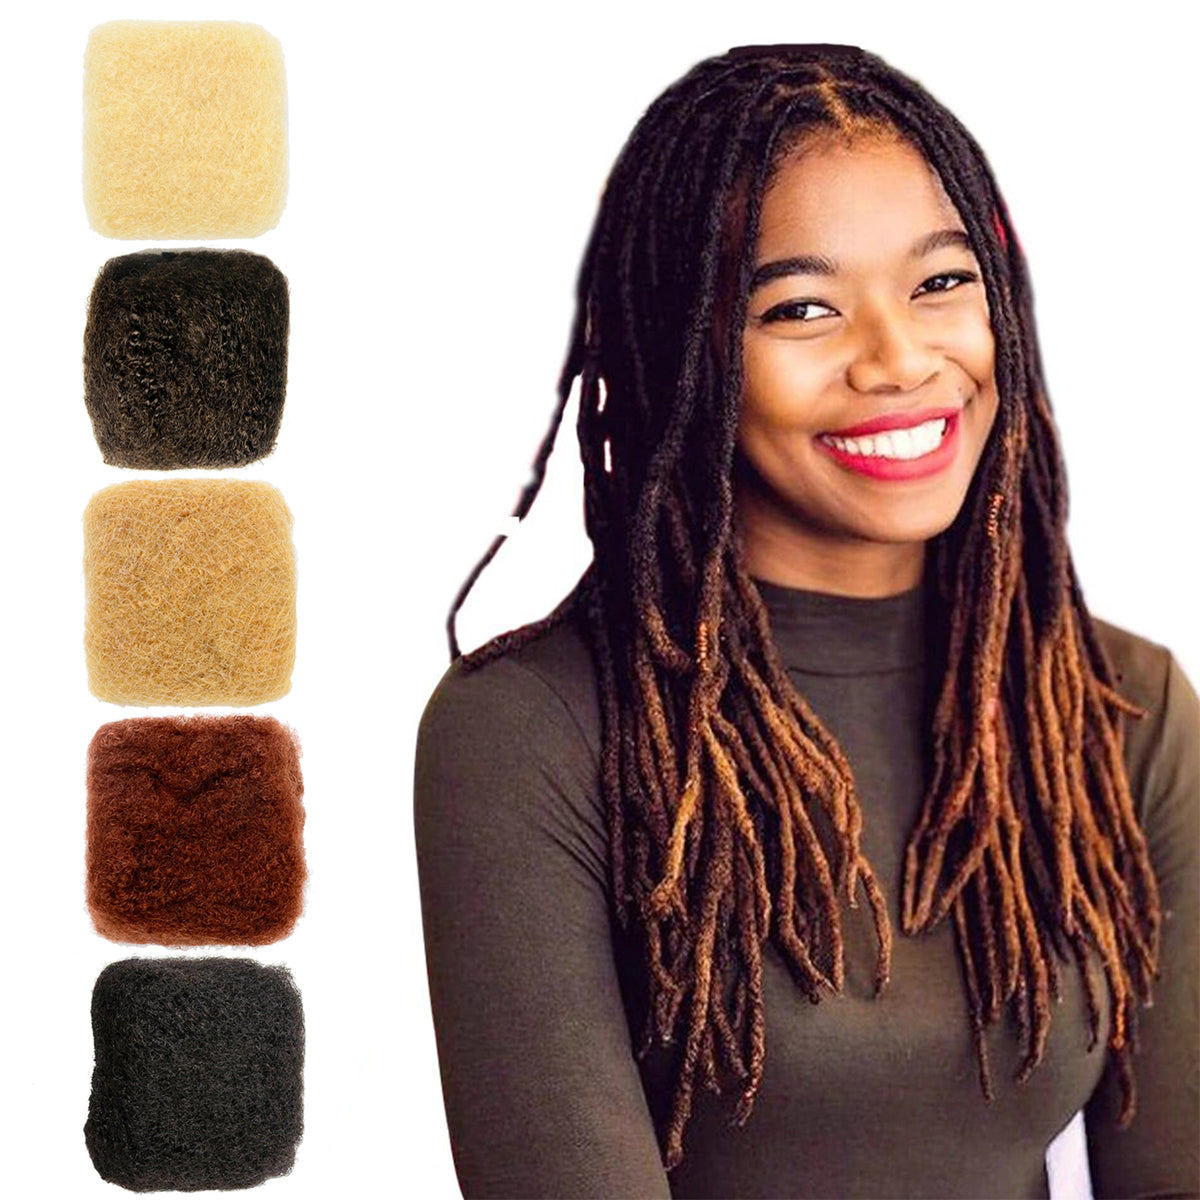 Afro Kinky Human Hairs For Making,Repairing & Bulking Locs 10 Inch Long Afro Kinky Bulk Human Hair For Dreadlock Extensions 100% Natural Afro Hairs For Twisting & Braiding 29g/1Oz (#2 / Dark Brown, 10 inch)